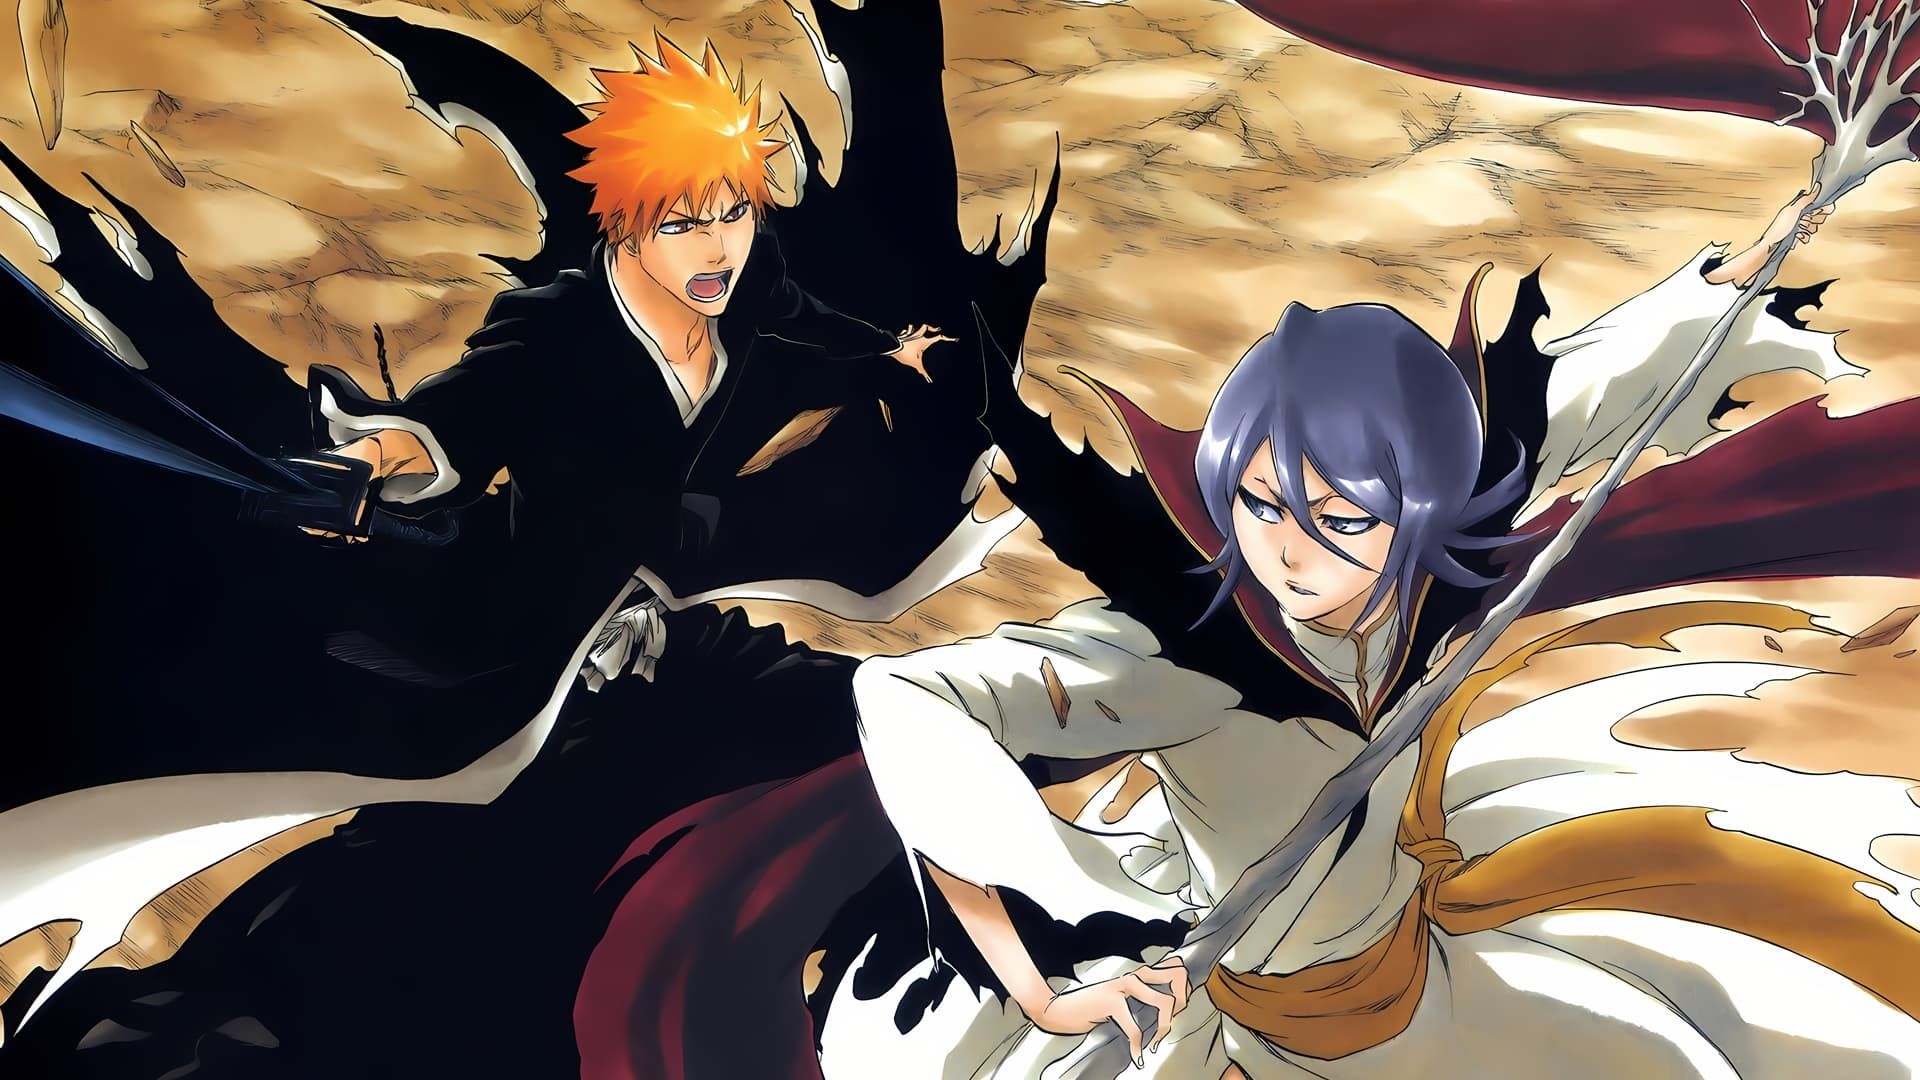 Bleach: Fade to Black, I Call Your Name Backdrop